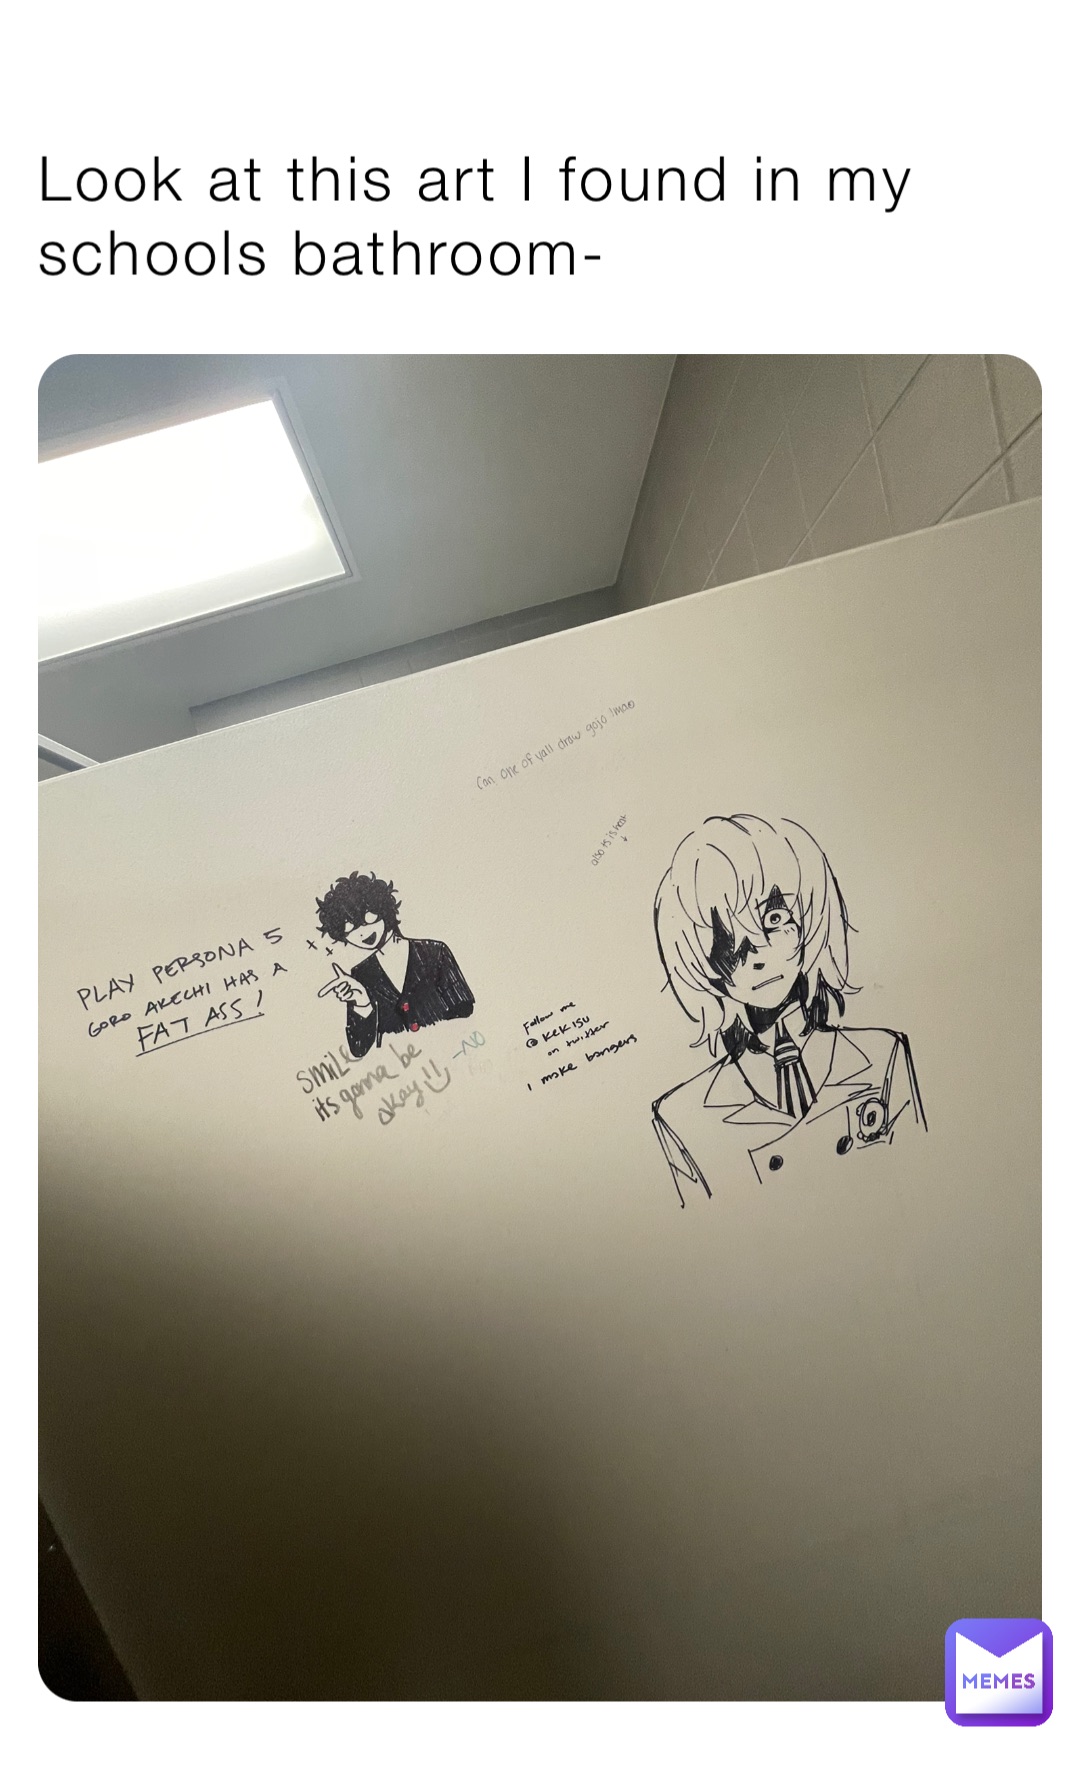 Look at this art I found in my schools bathroom-